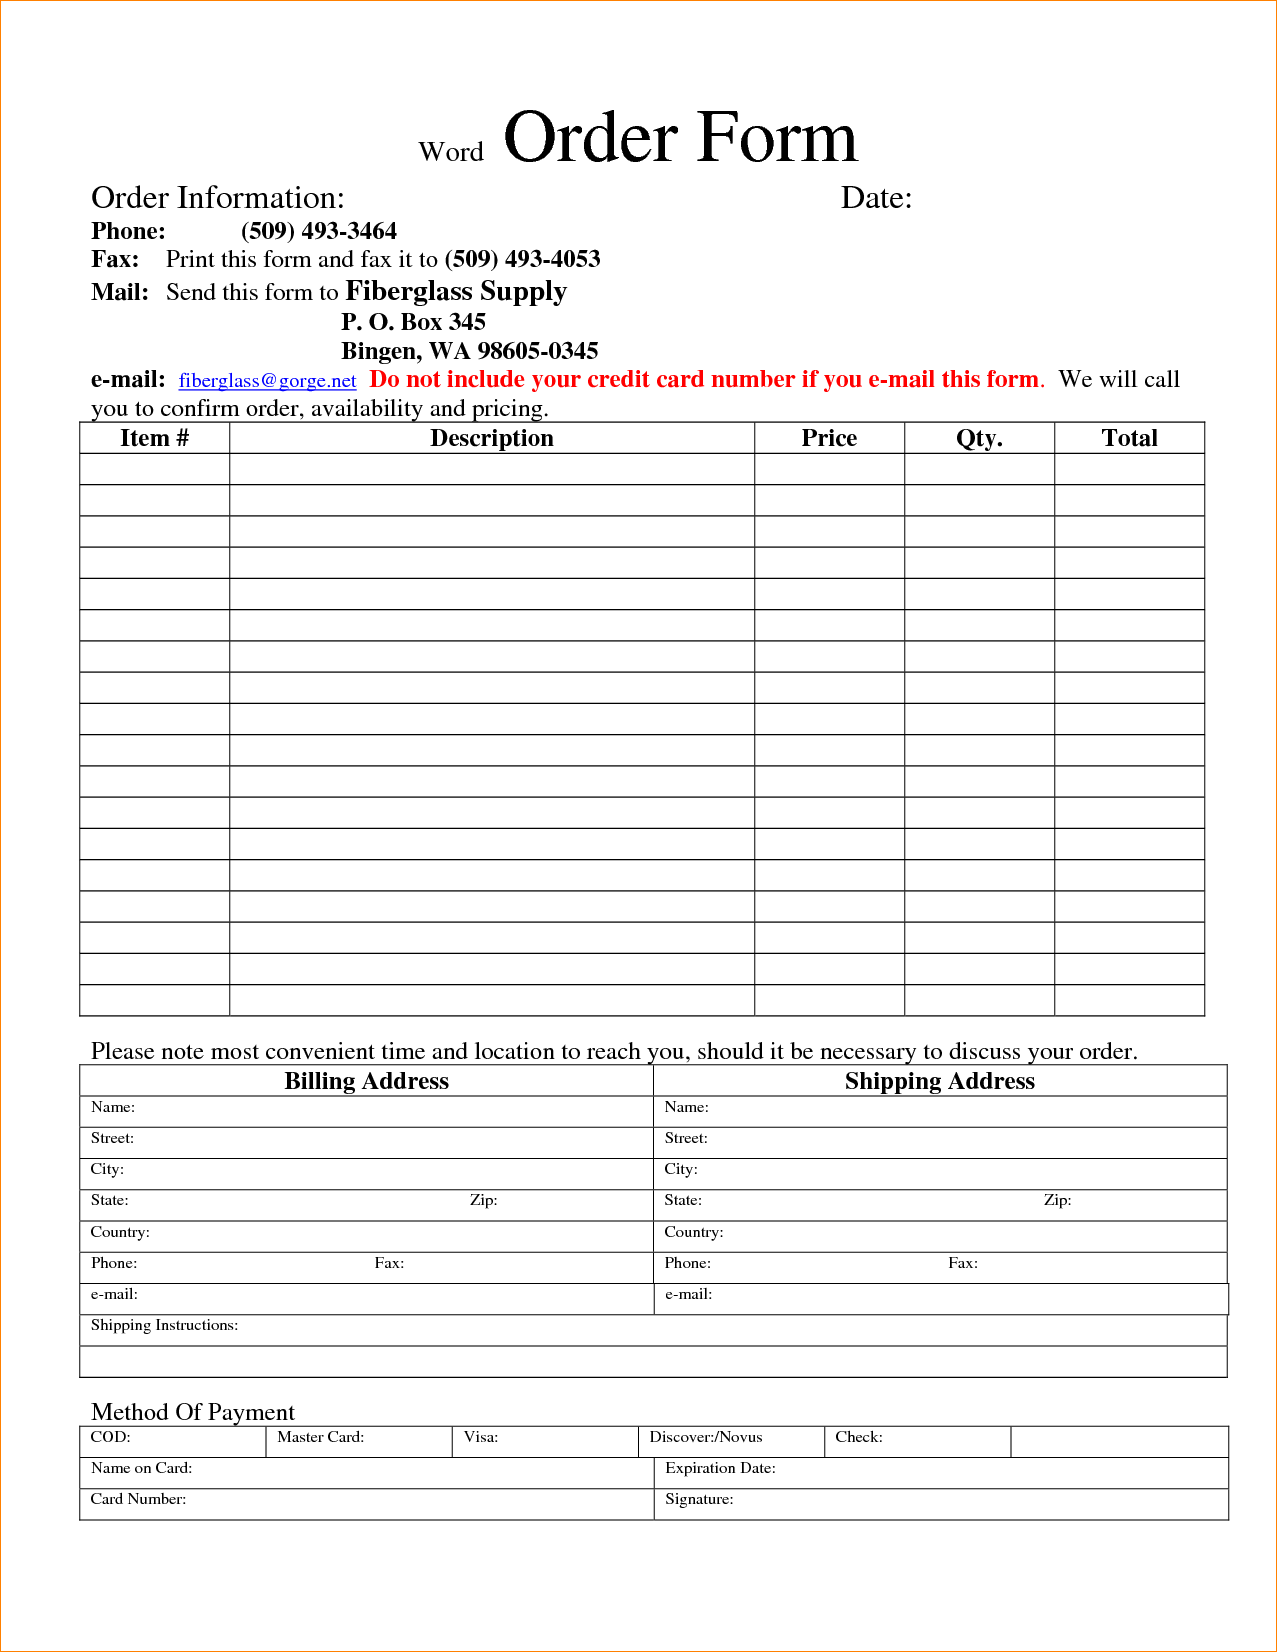 word order form templates   Boat.jeremyeaton.co